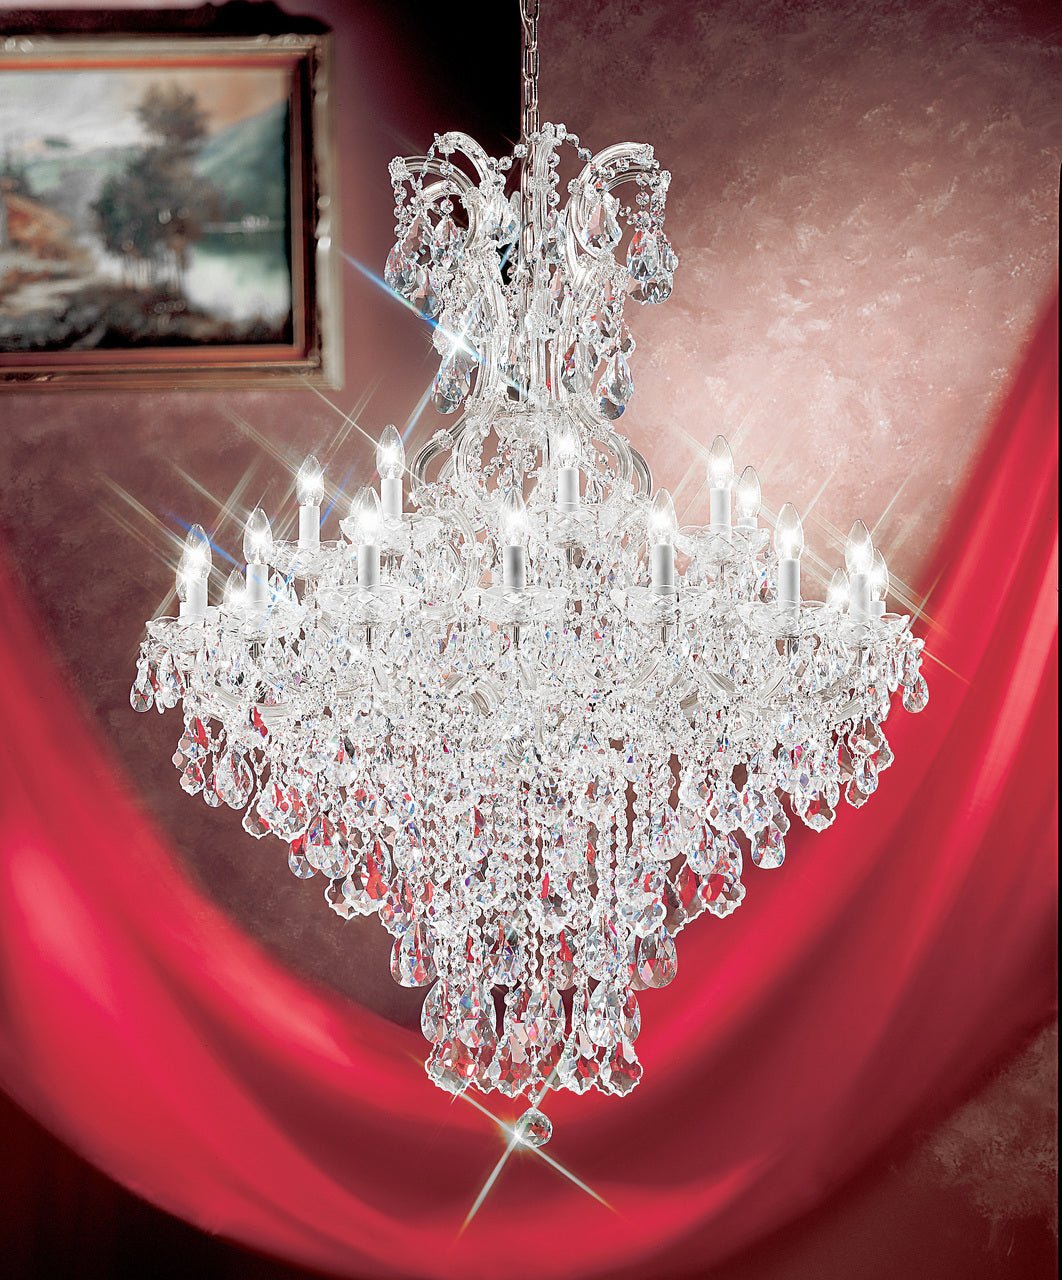 Classic Lighting 8179 CH S Maria Theresa Traditional Crystal Chandelier in Chrome (Imported from Italy)